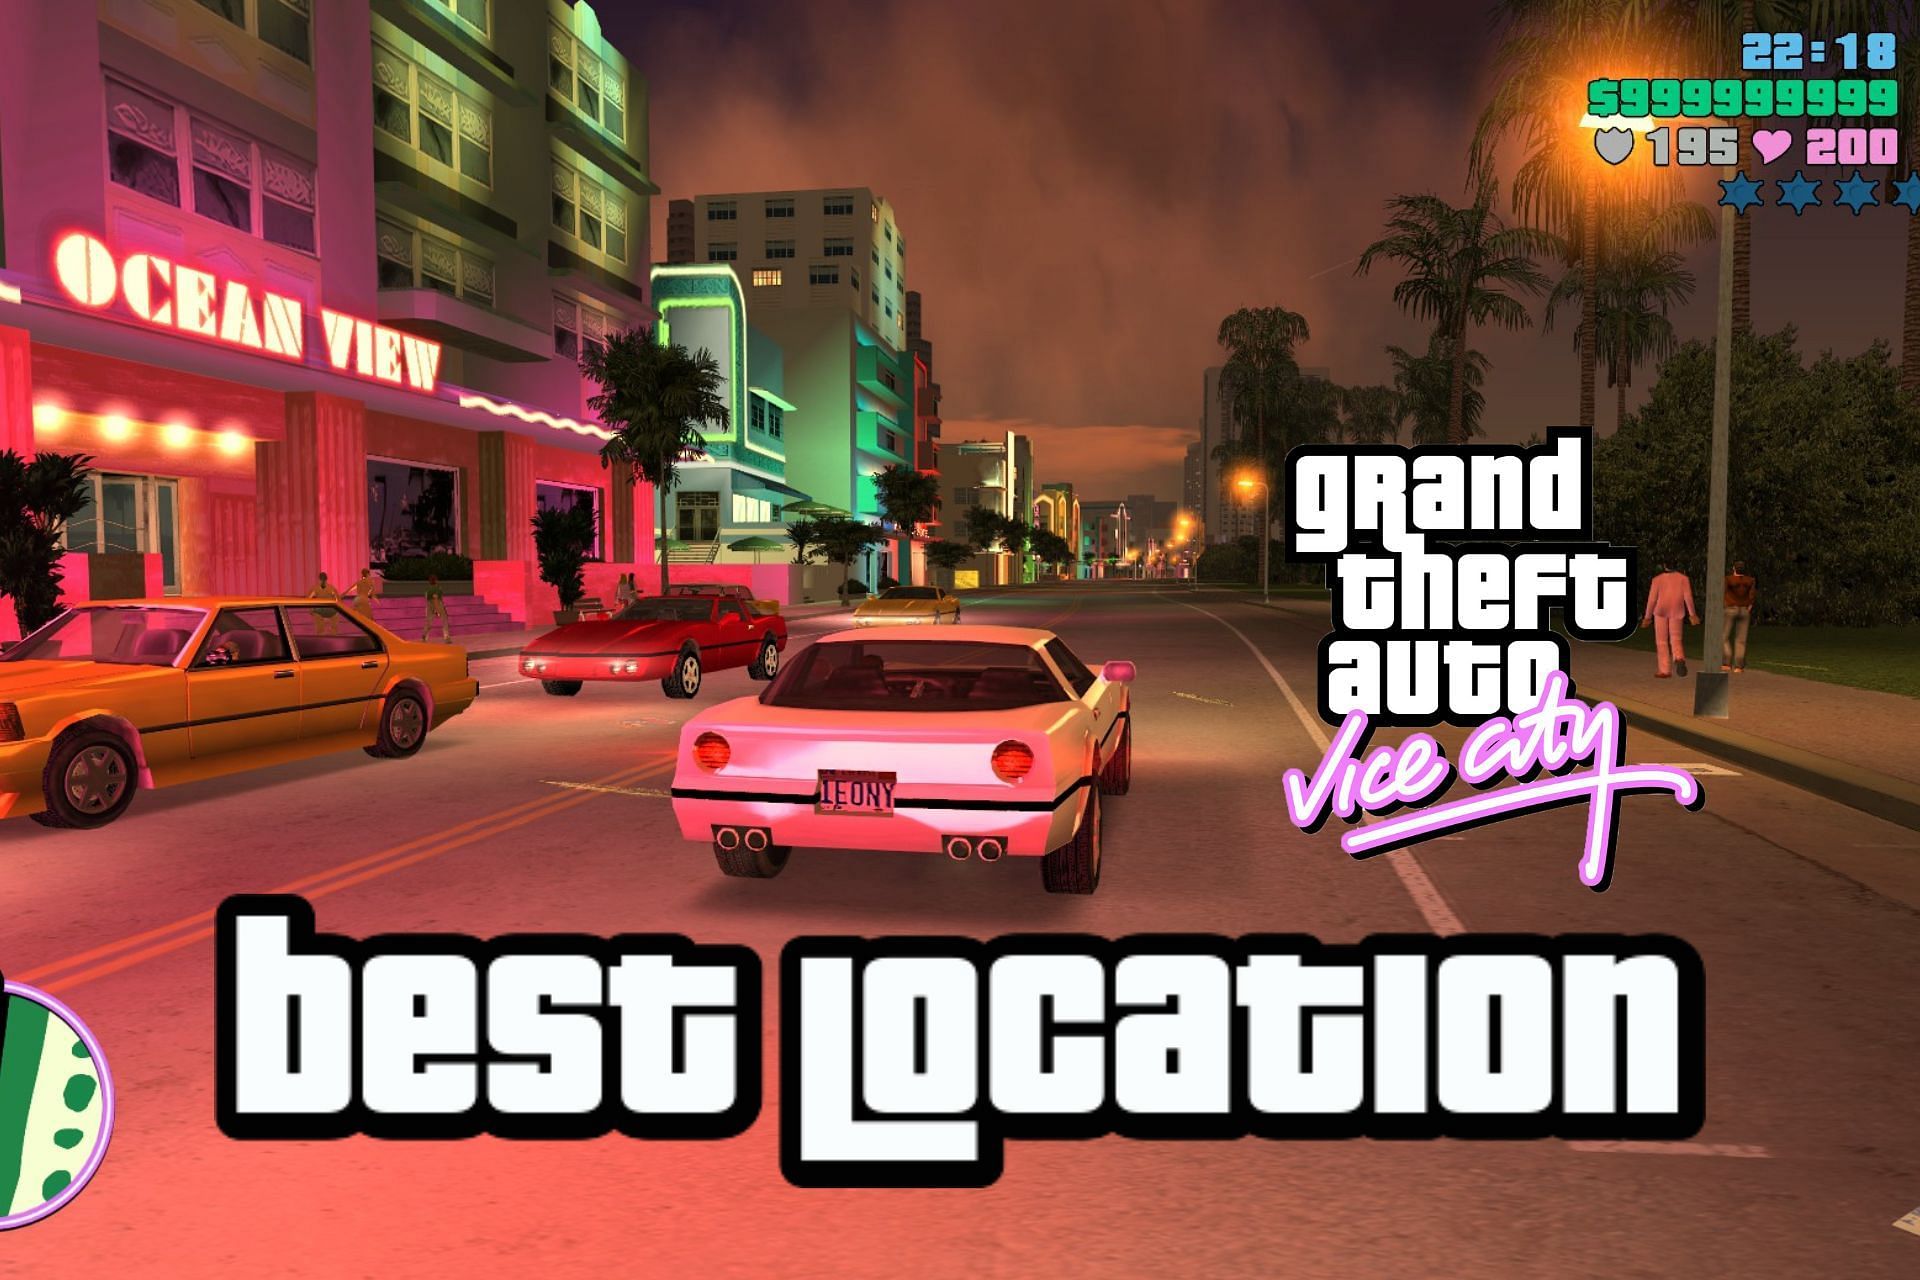 Which location in Vice City do GTA players consider to be the best? (Image via Rockstar Games)